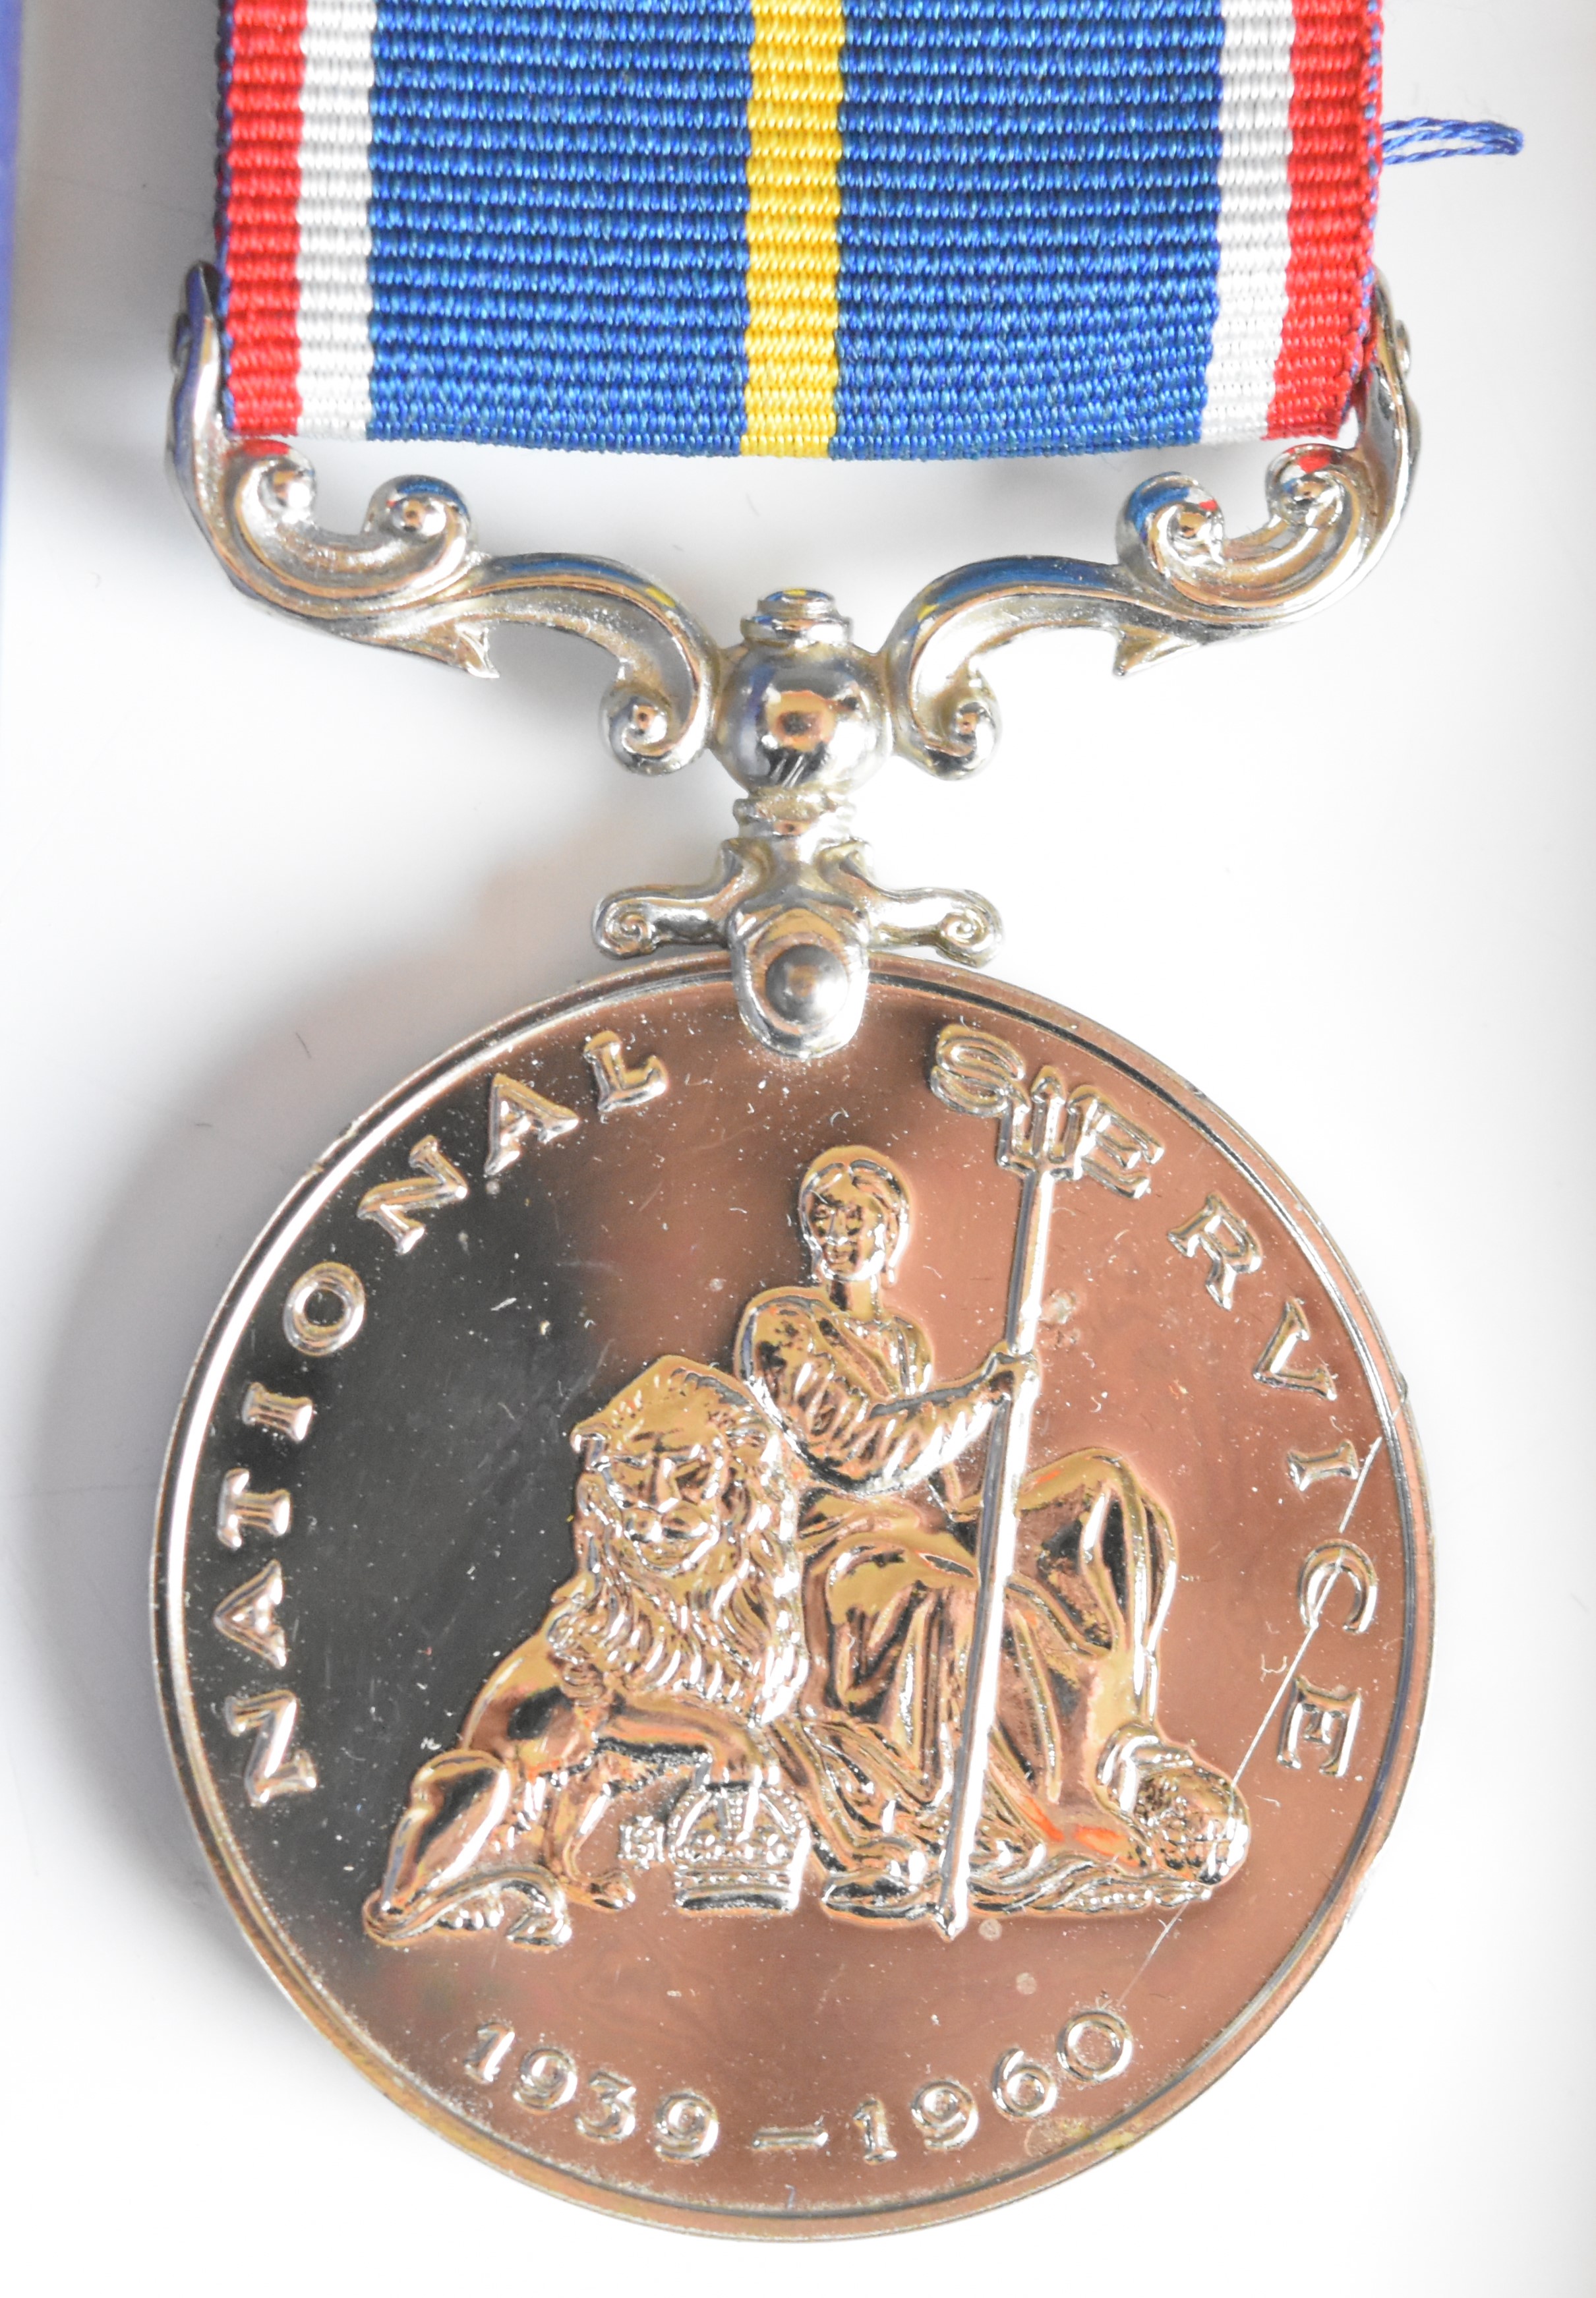 British Army WW1 medal trio comprising 1914/1915 Star, War Medal and Victory Medal named to 38207 - Image 4 of 11